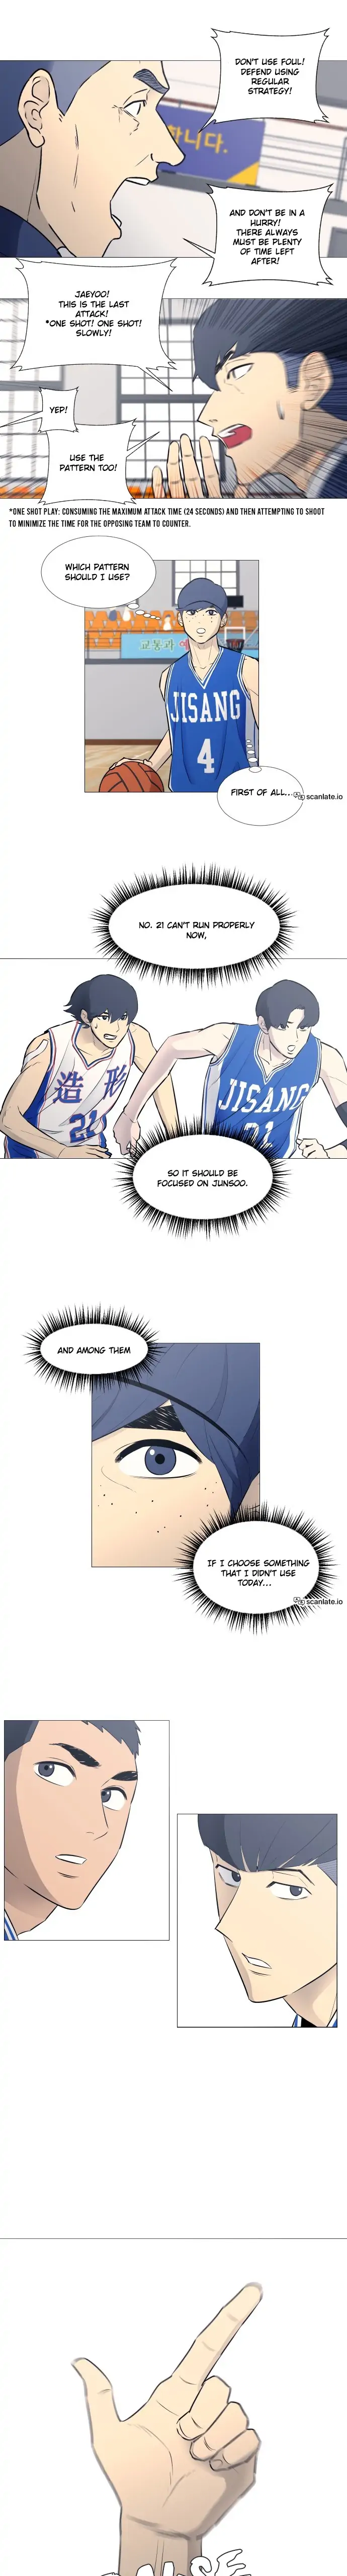 Garbage Time – Basketball Underdogs Chapter 31 - Page 1